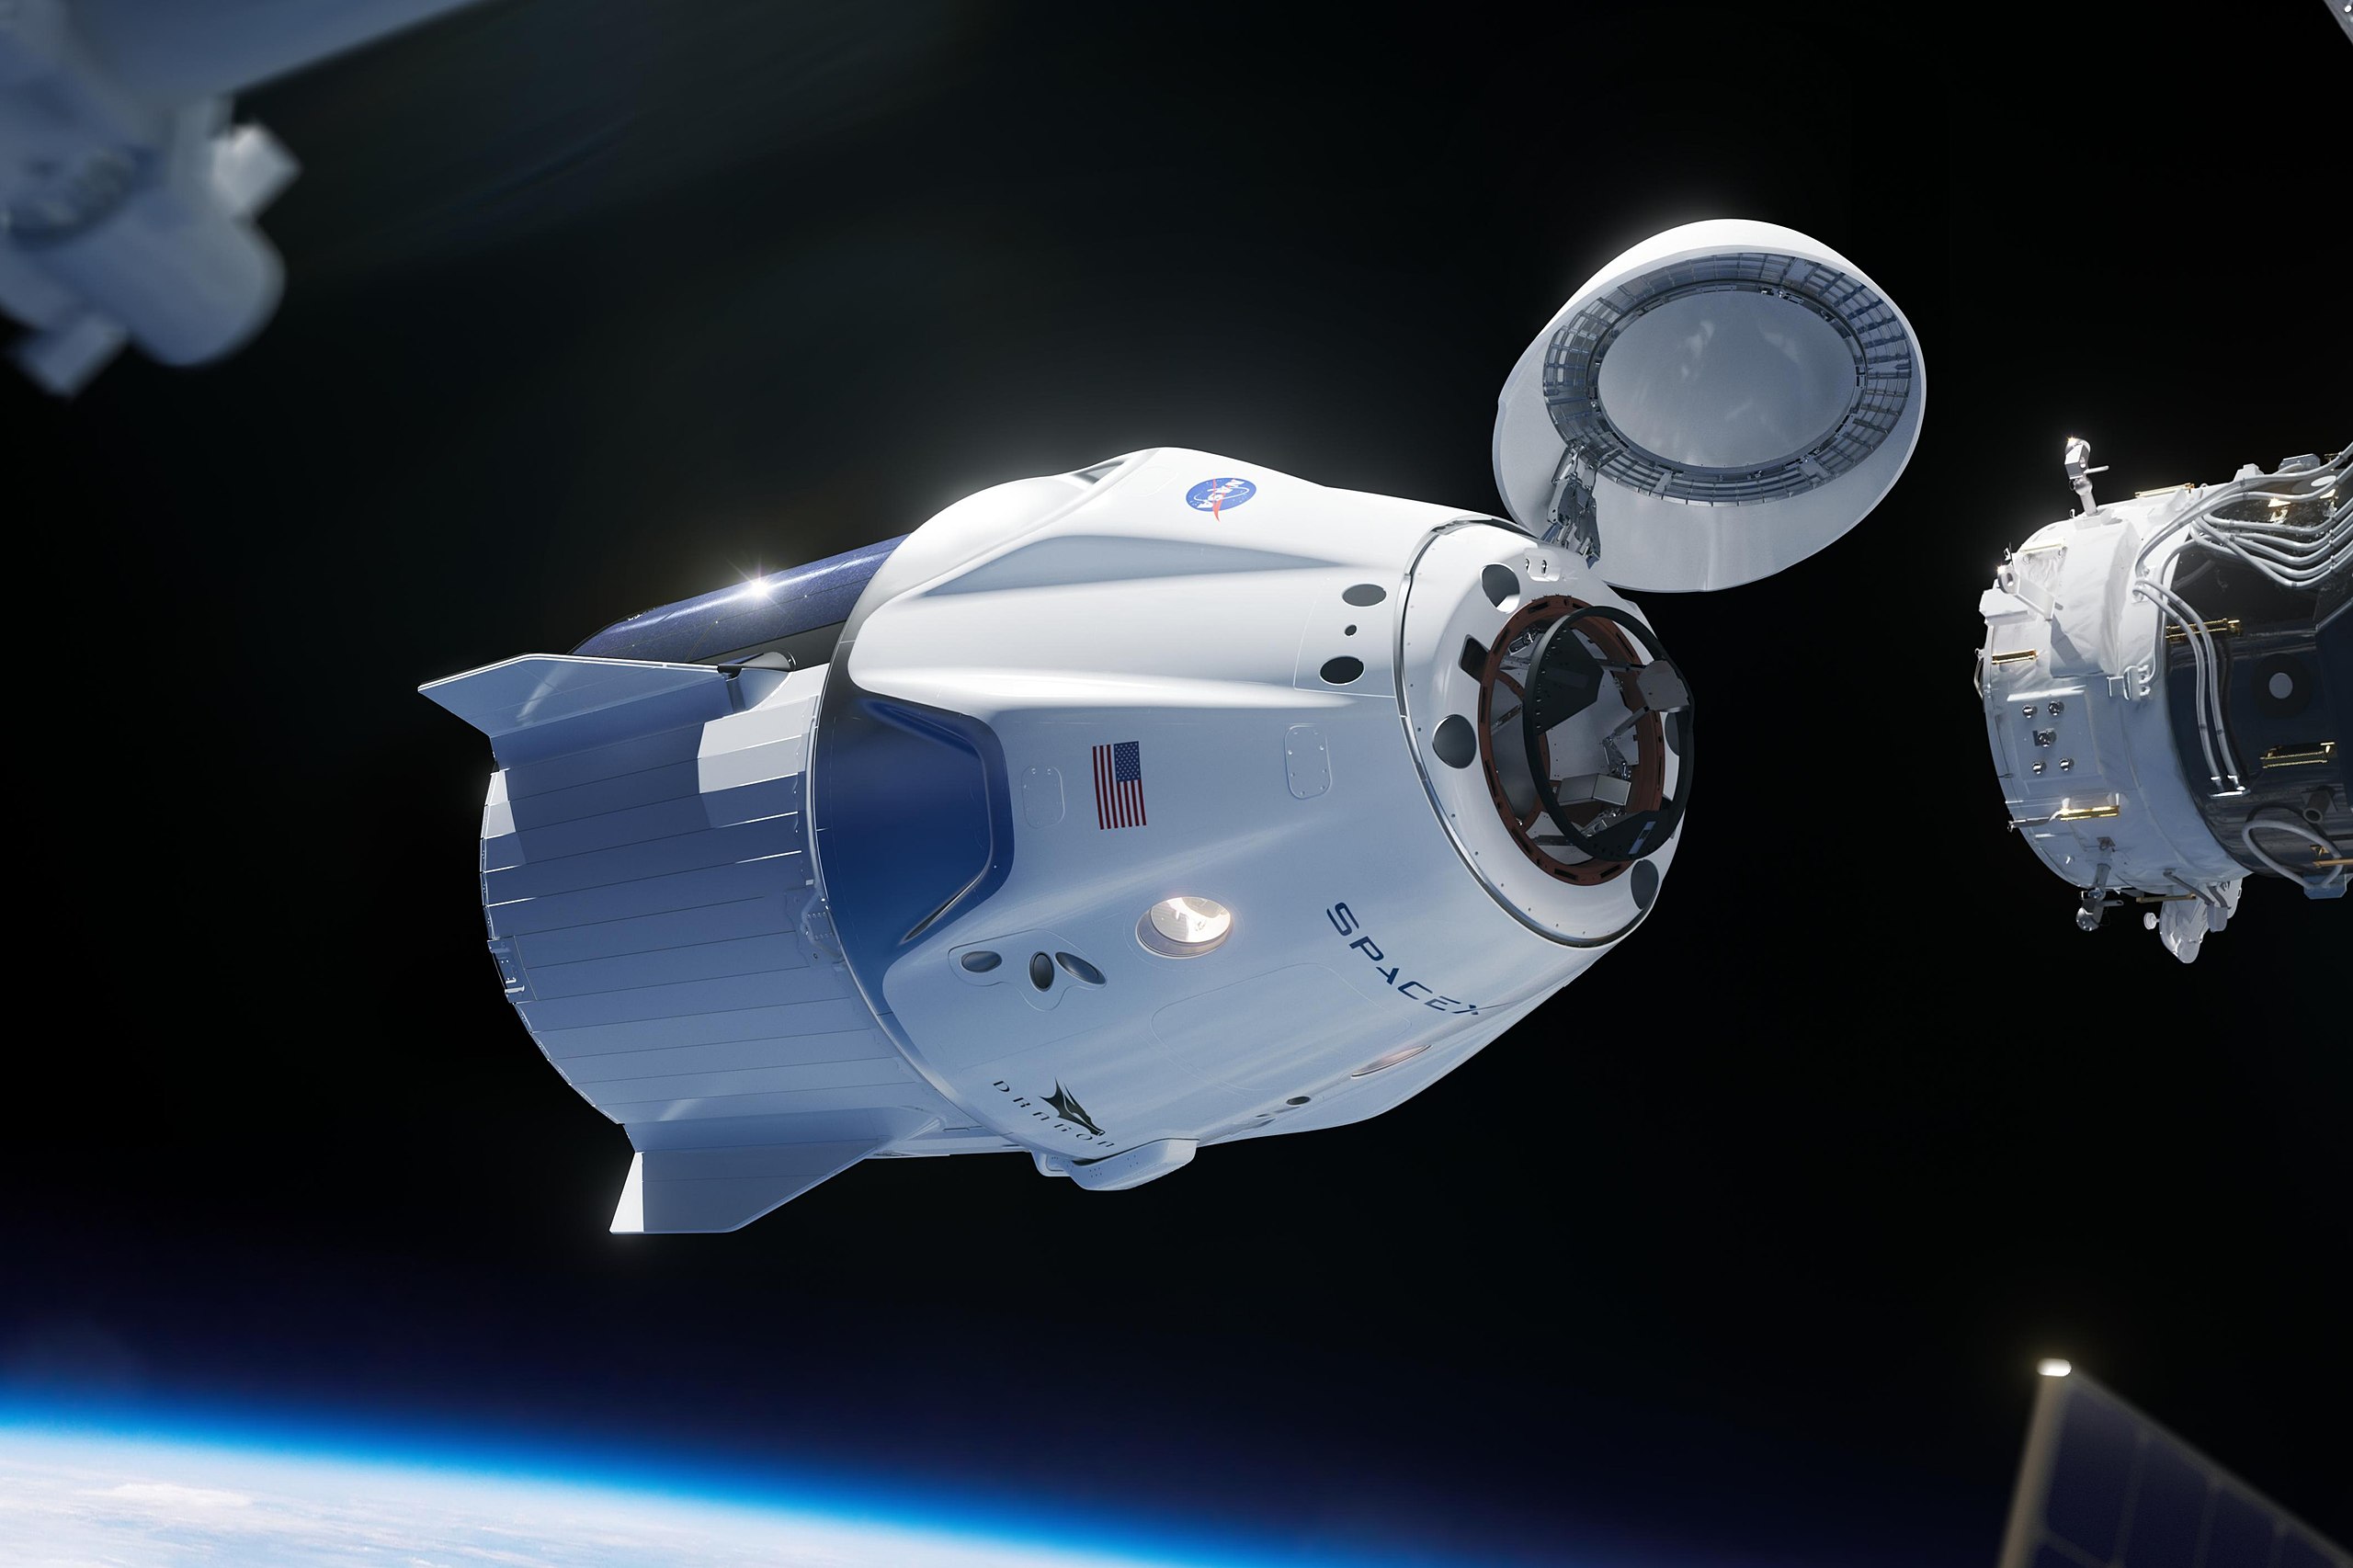 benefits of private space travel